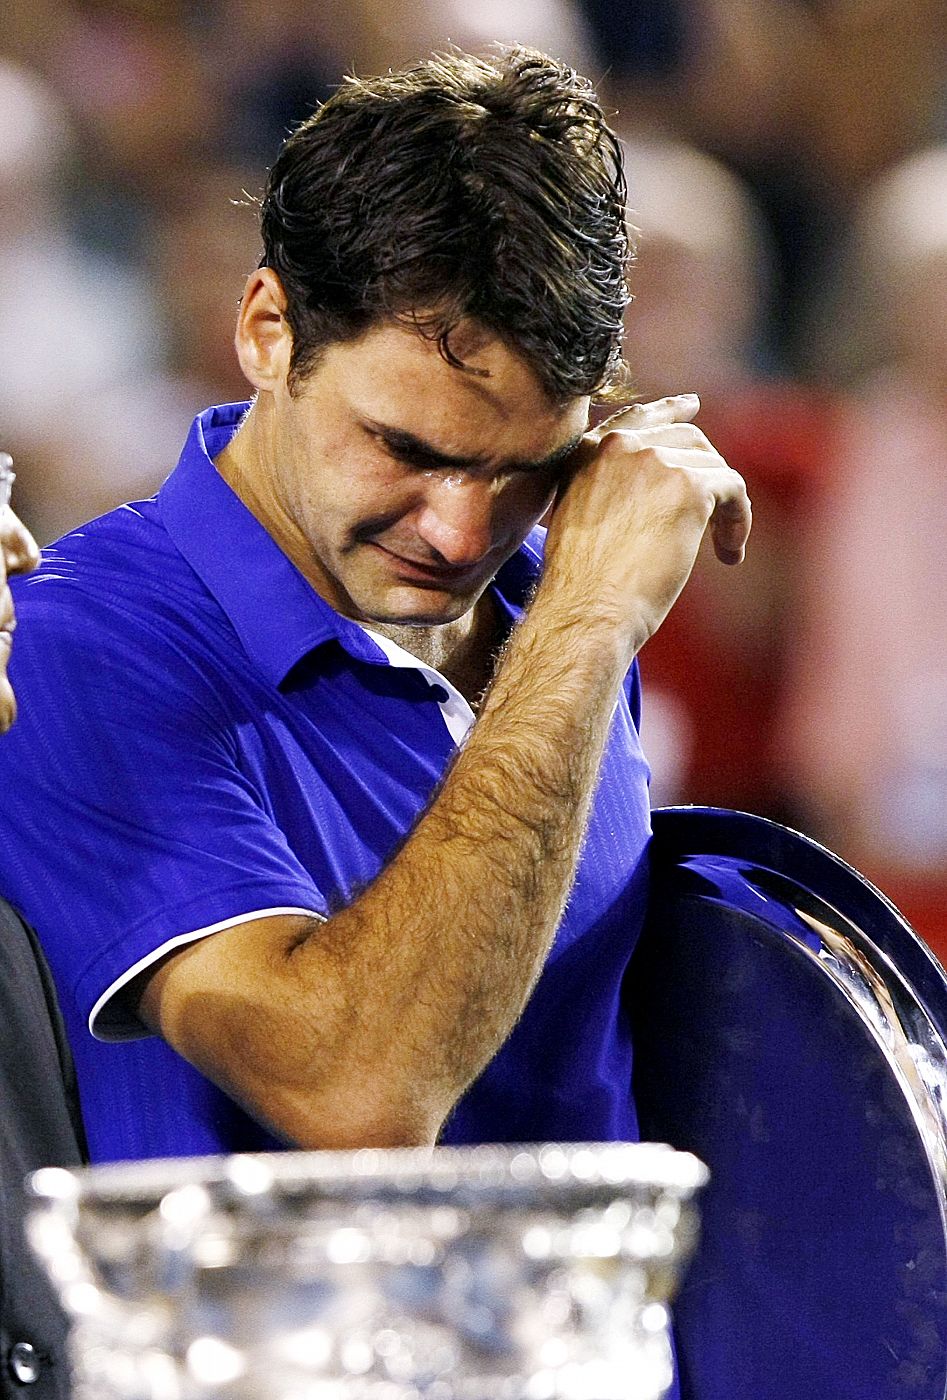 Switzerland's Federer cries after losing his men's singles final match against Spain's Nadal at the Australian Open